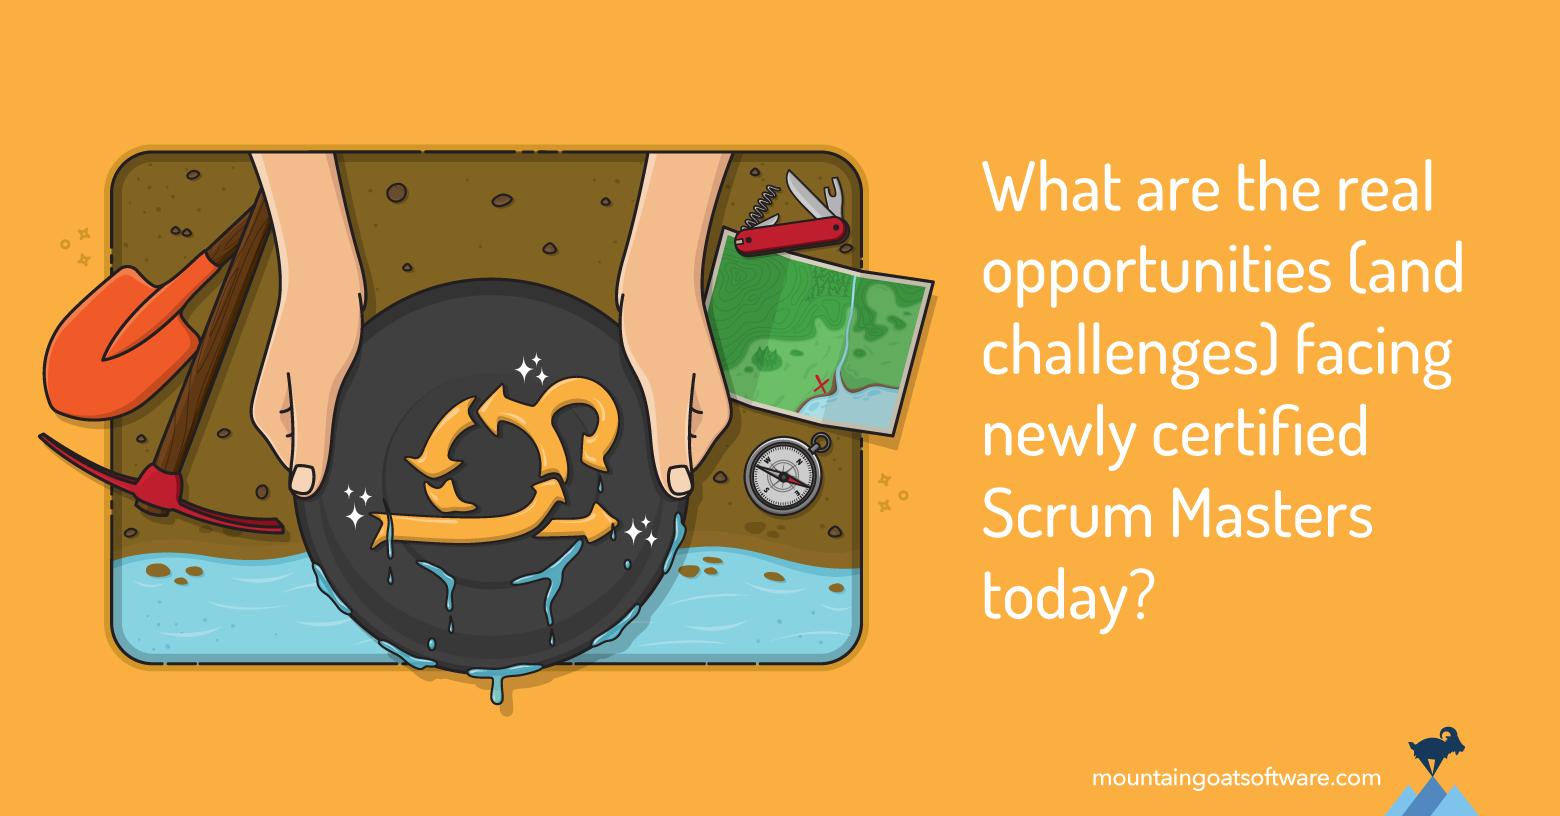 Is 2020 a Gold Rush Year for New Scrum Masters?